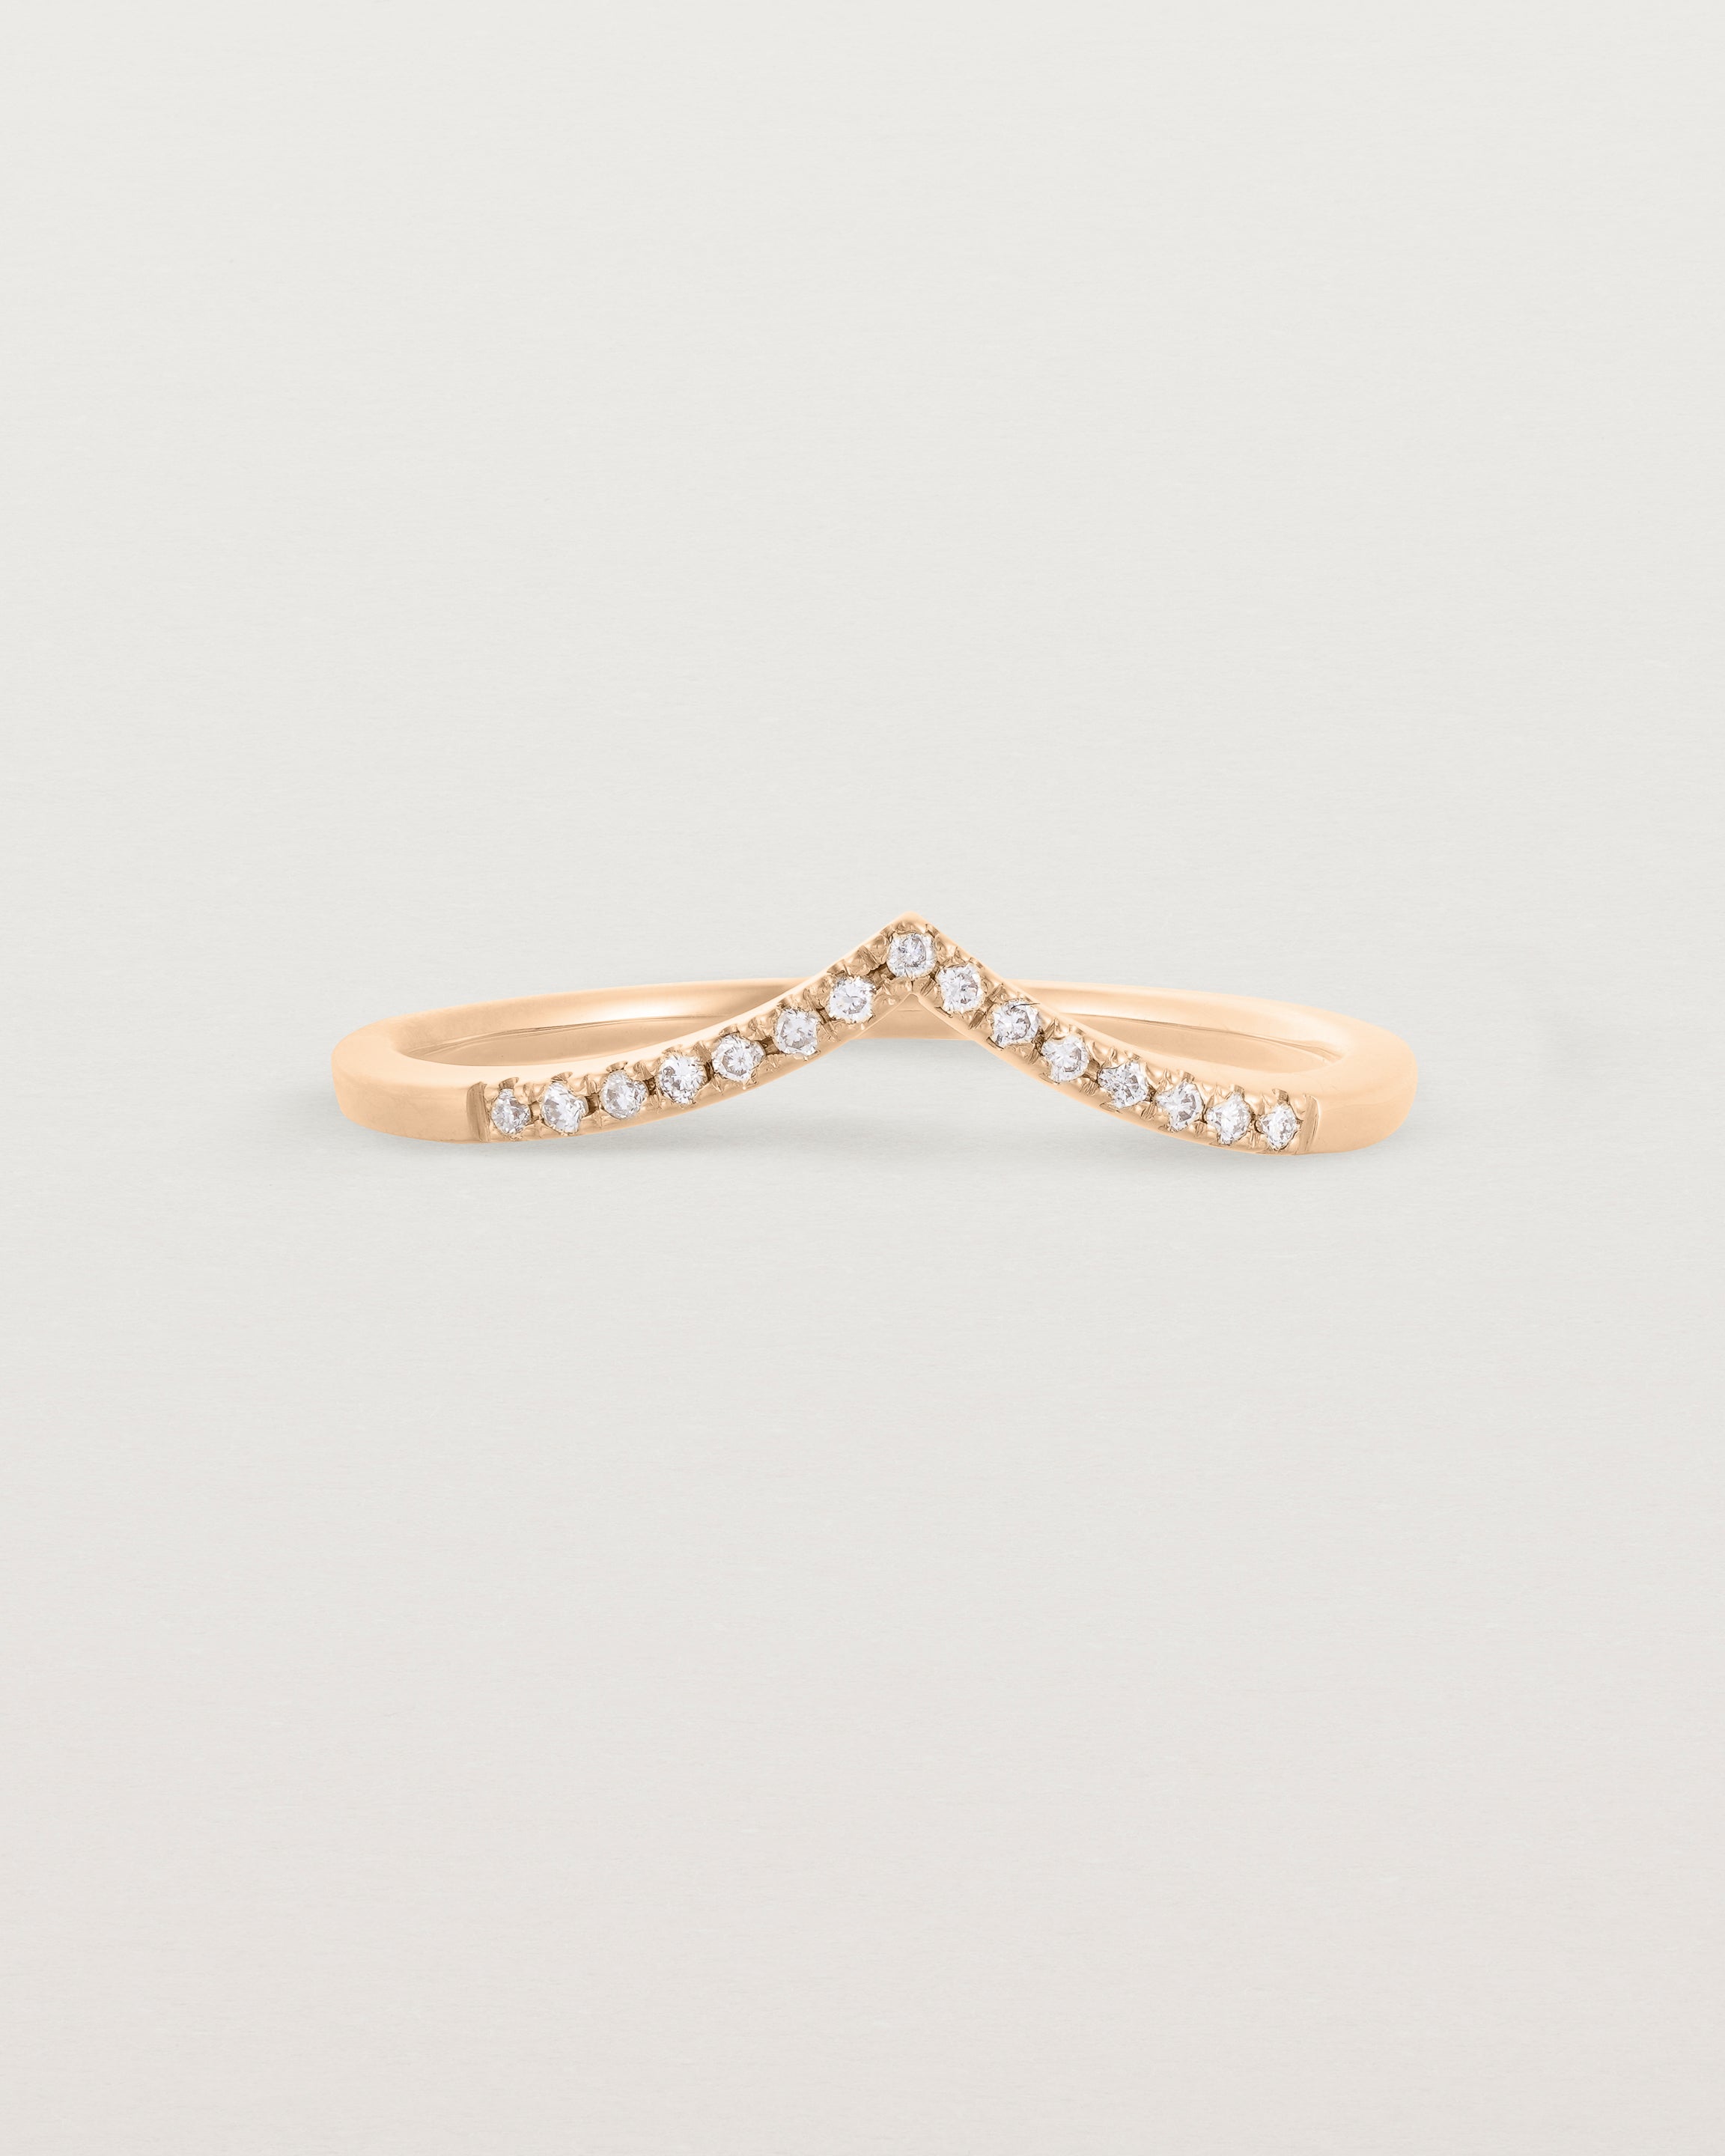 White diamond gentle point ring crafted in rose gold